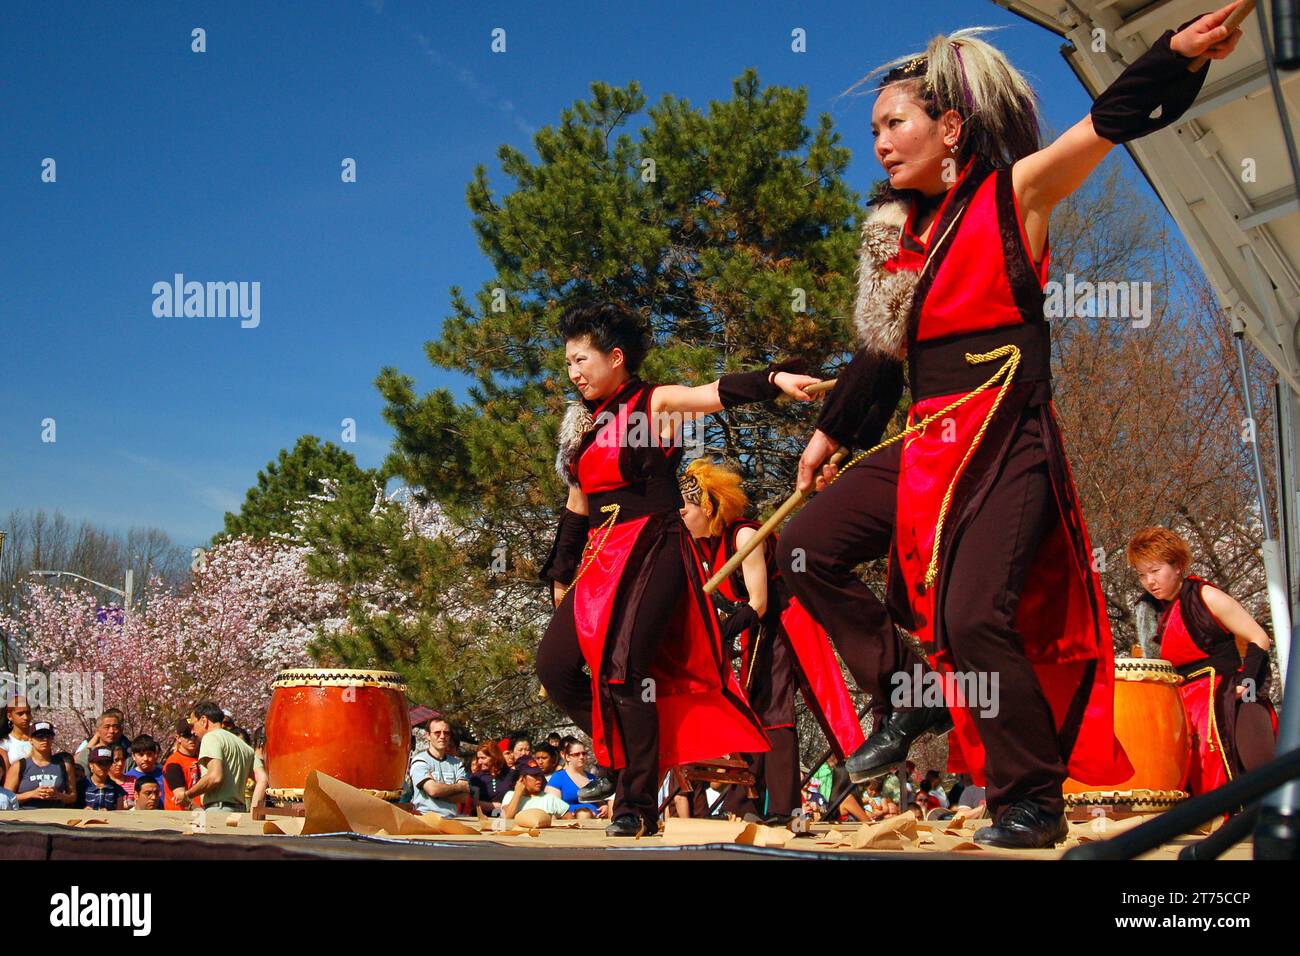 A Japanese Taiko Drum and Dance group preforms on stage at a cherry blossom sakura festival Stock Photo